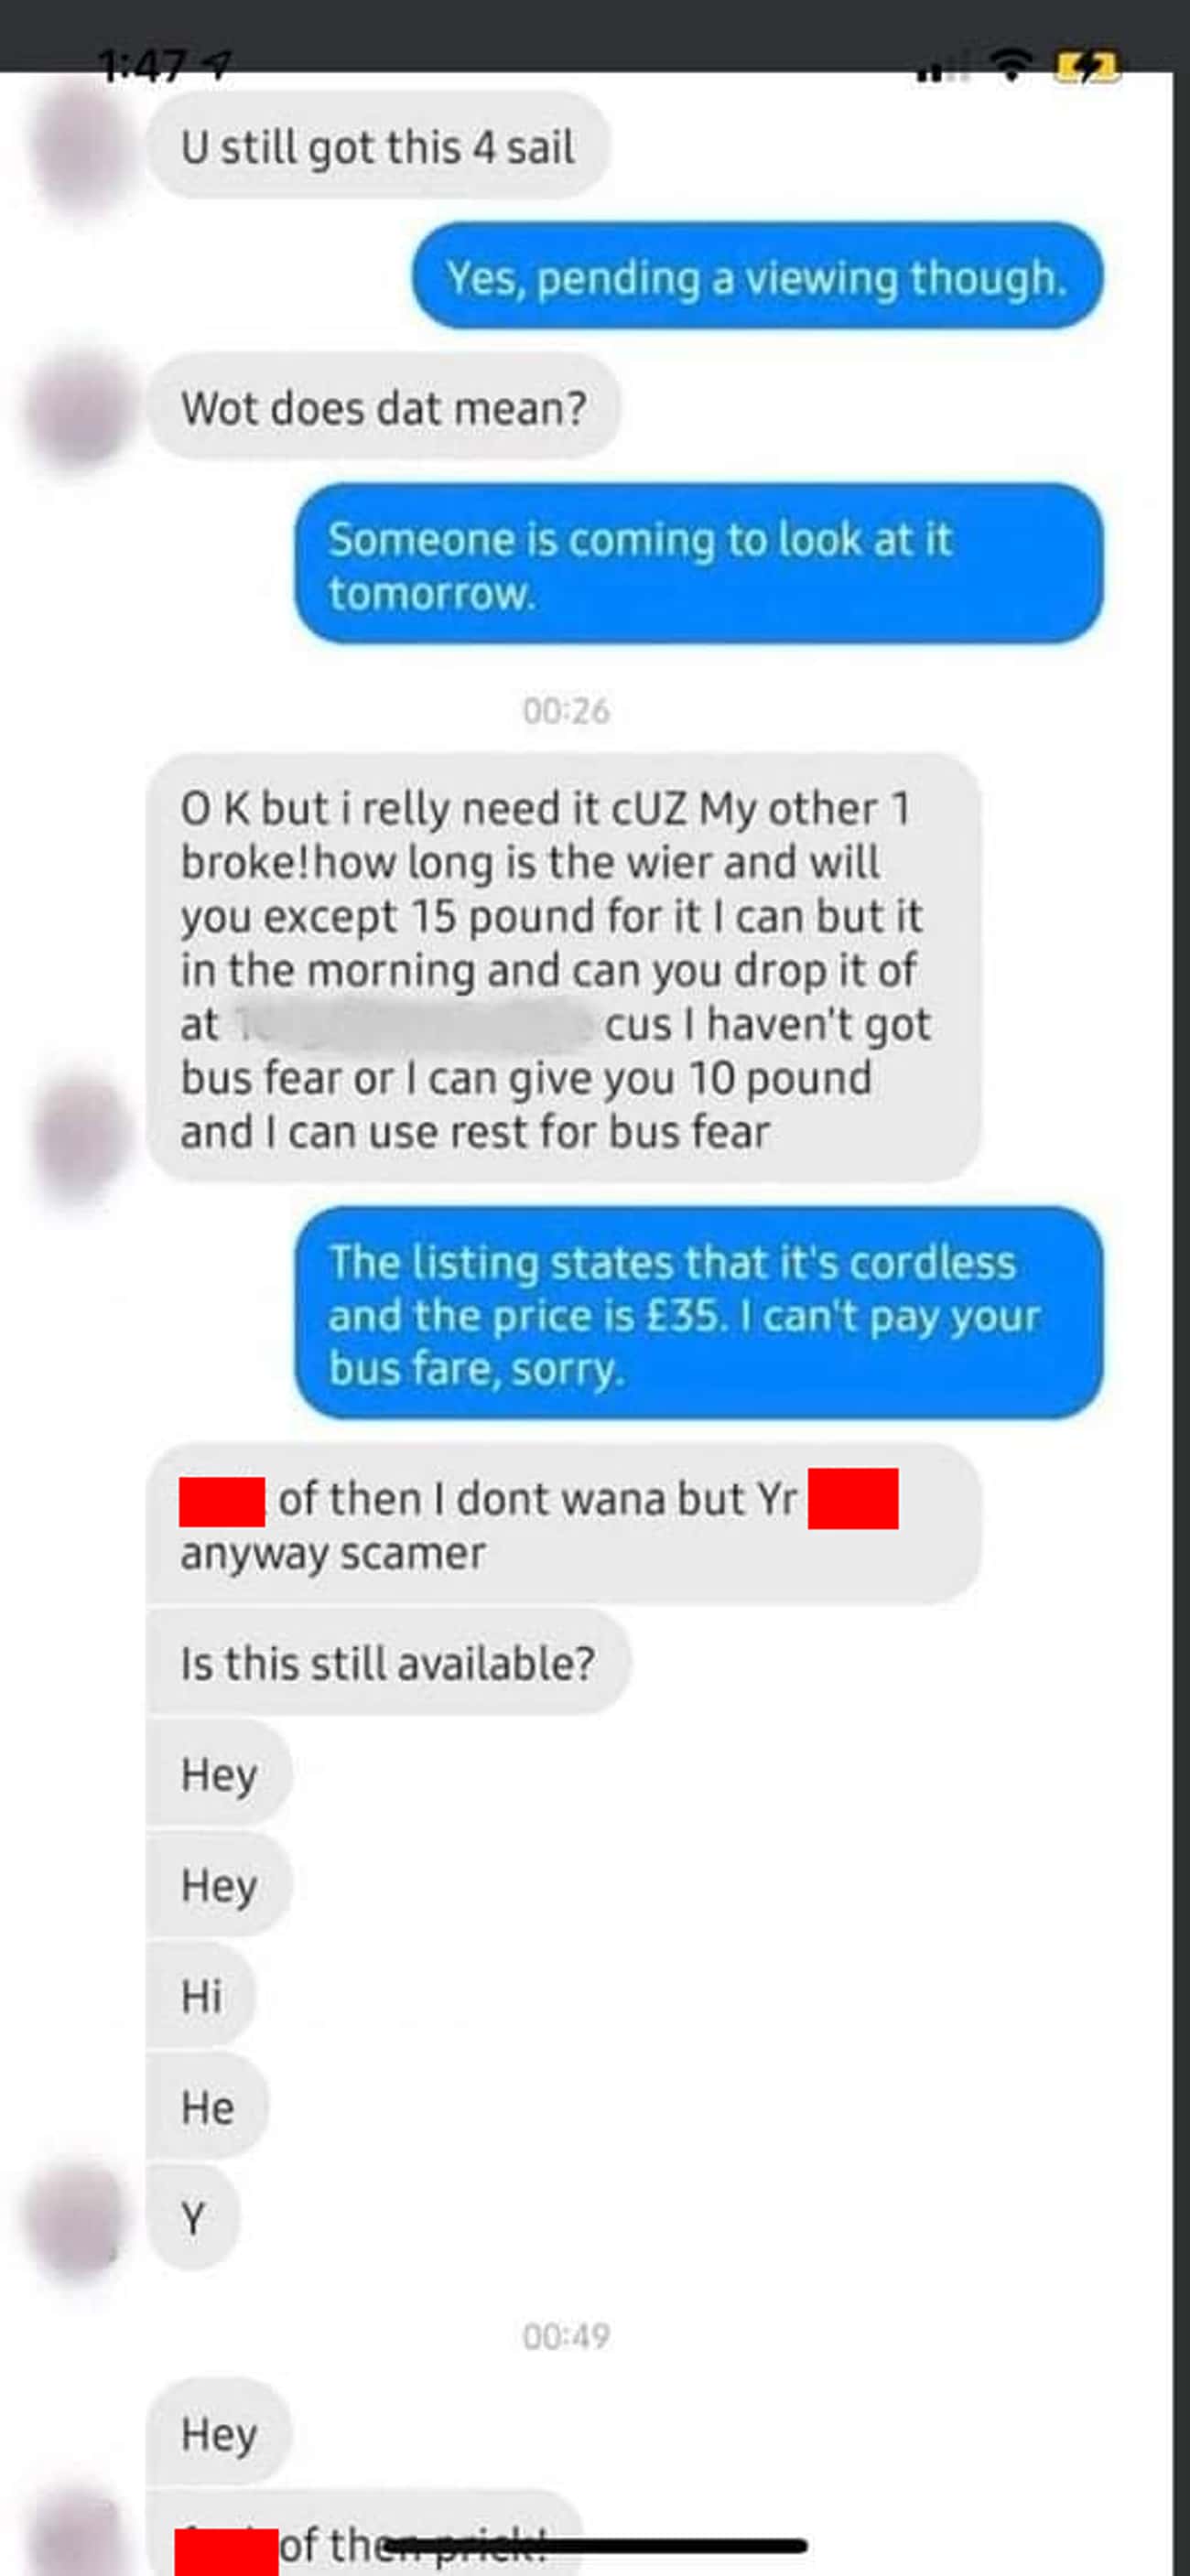 Buyer Wants His Transportation Paid For, Curses Out Seller, Asks If Item Is Still Available